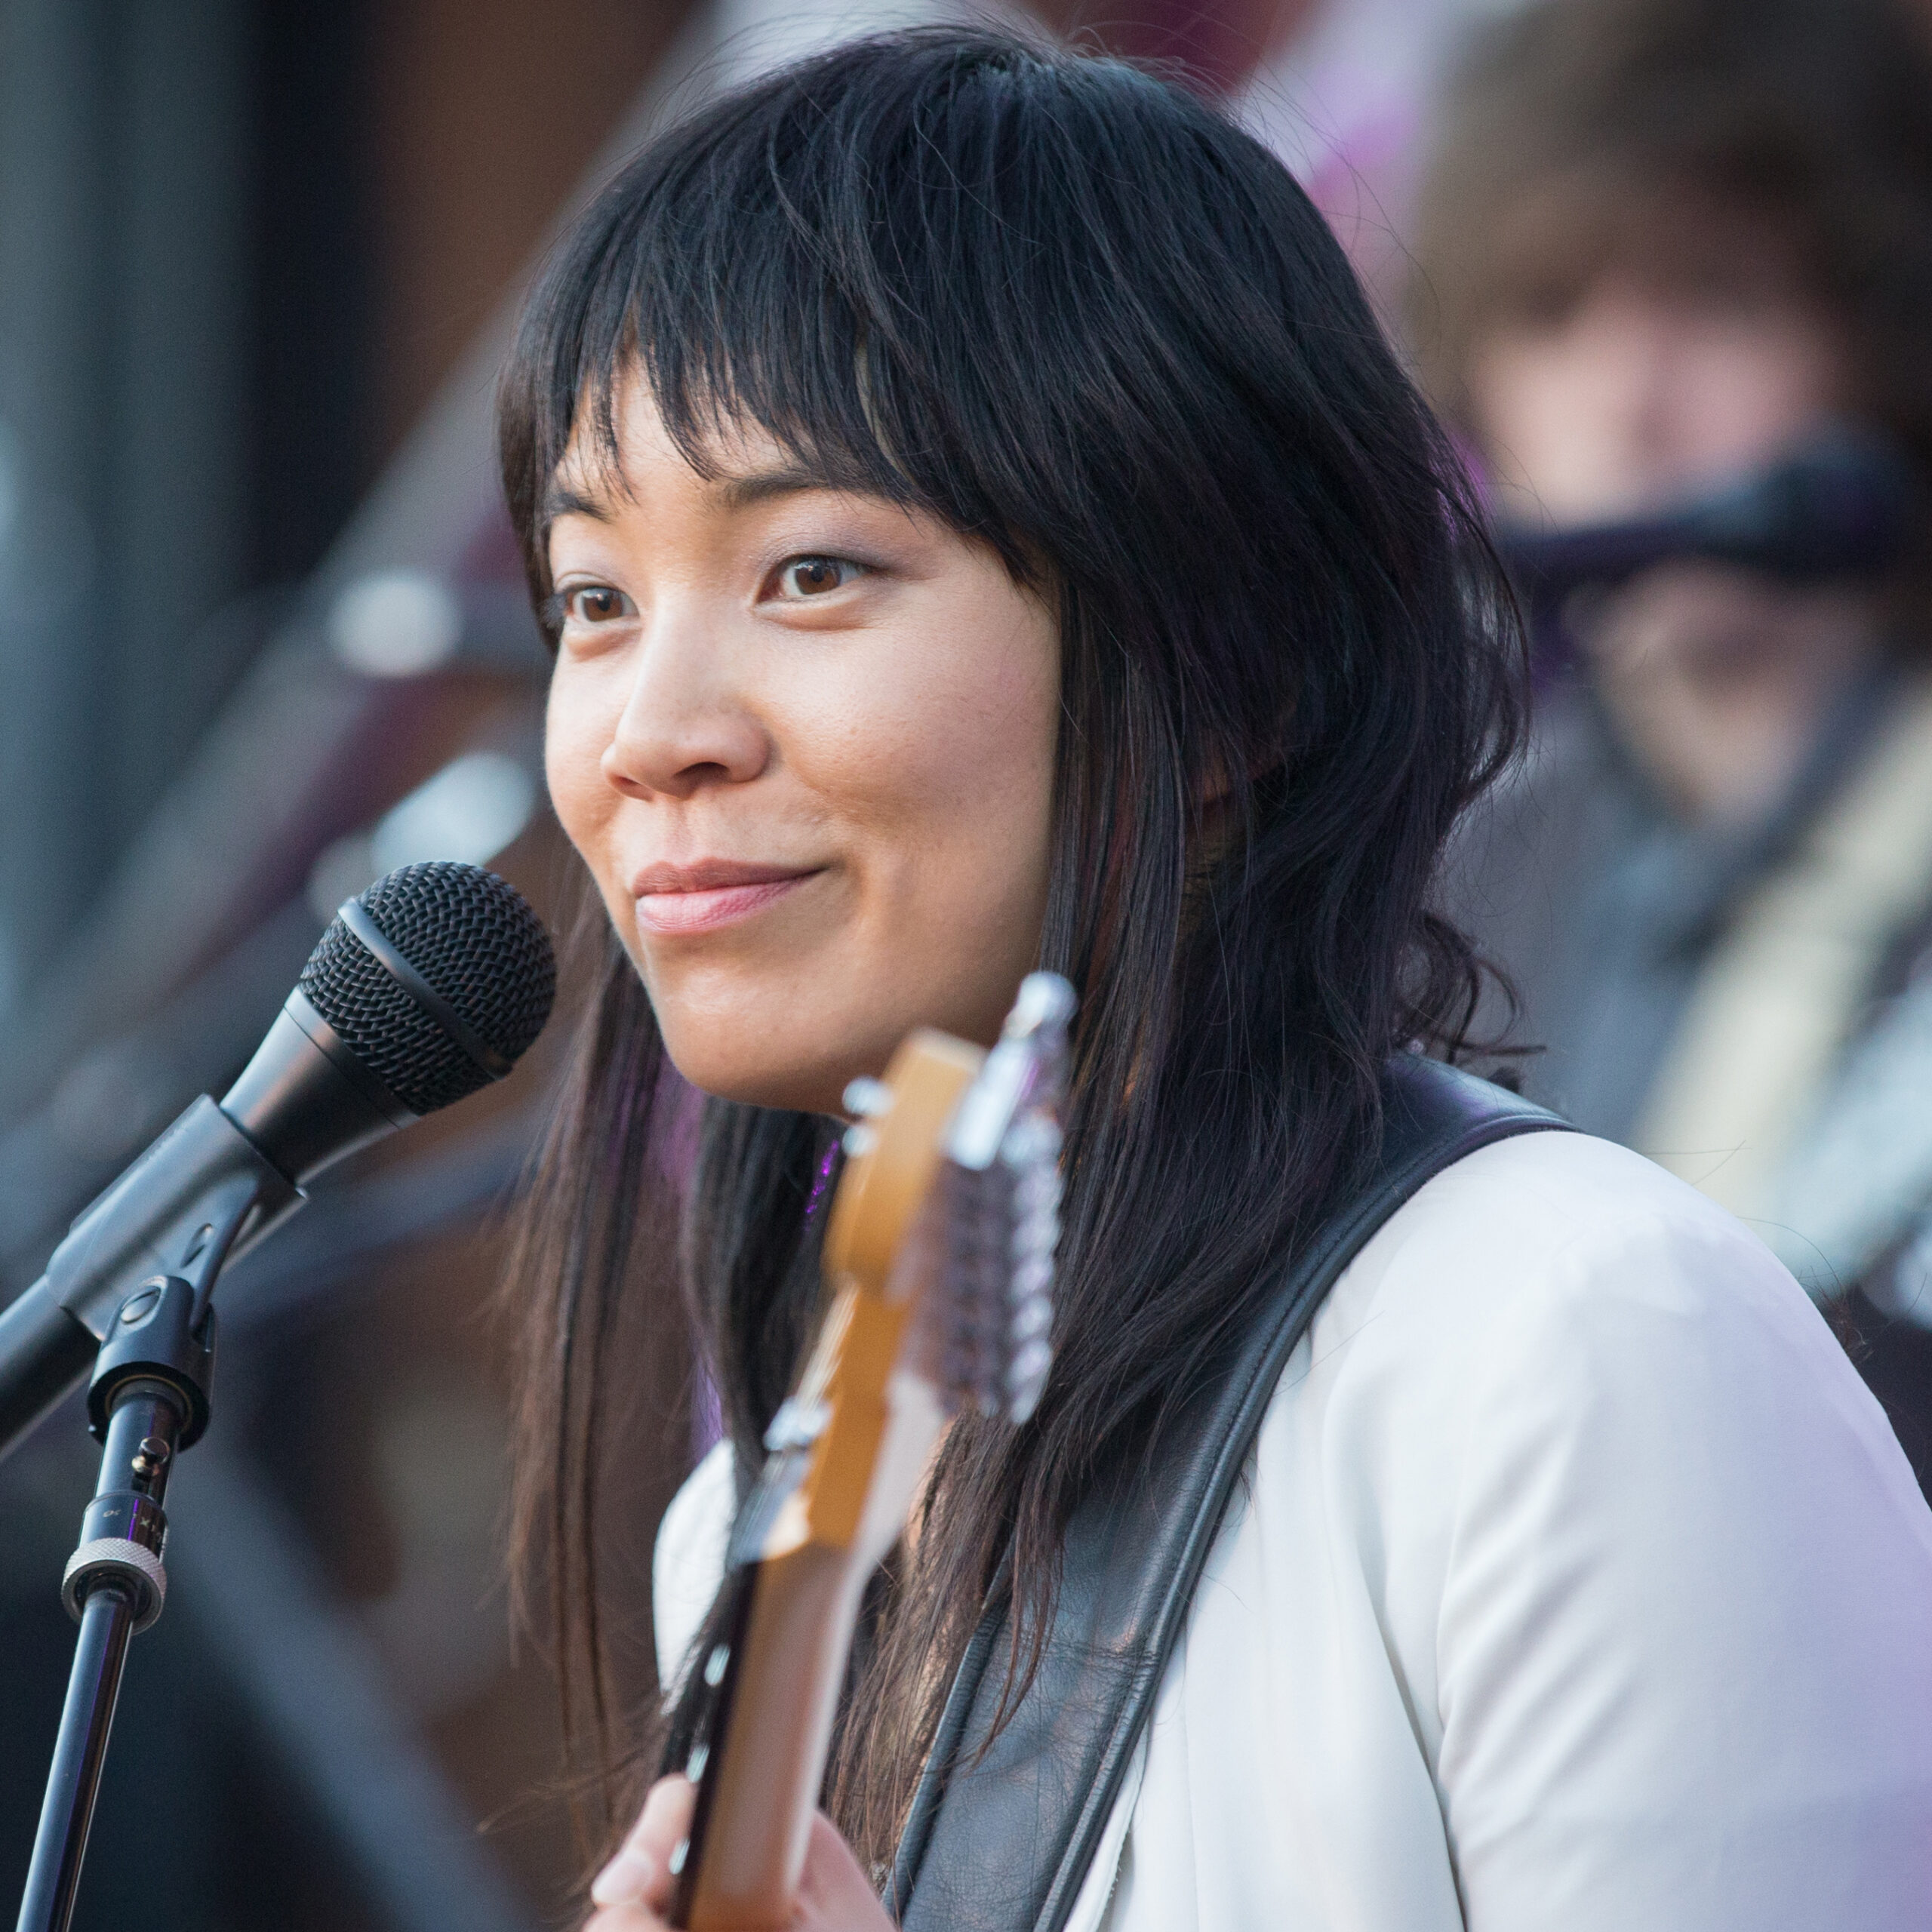 Thao Nguyen of Thao & The Get Down Stay Down